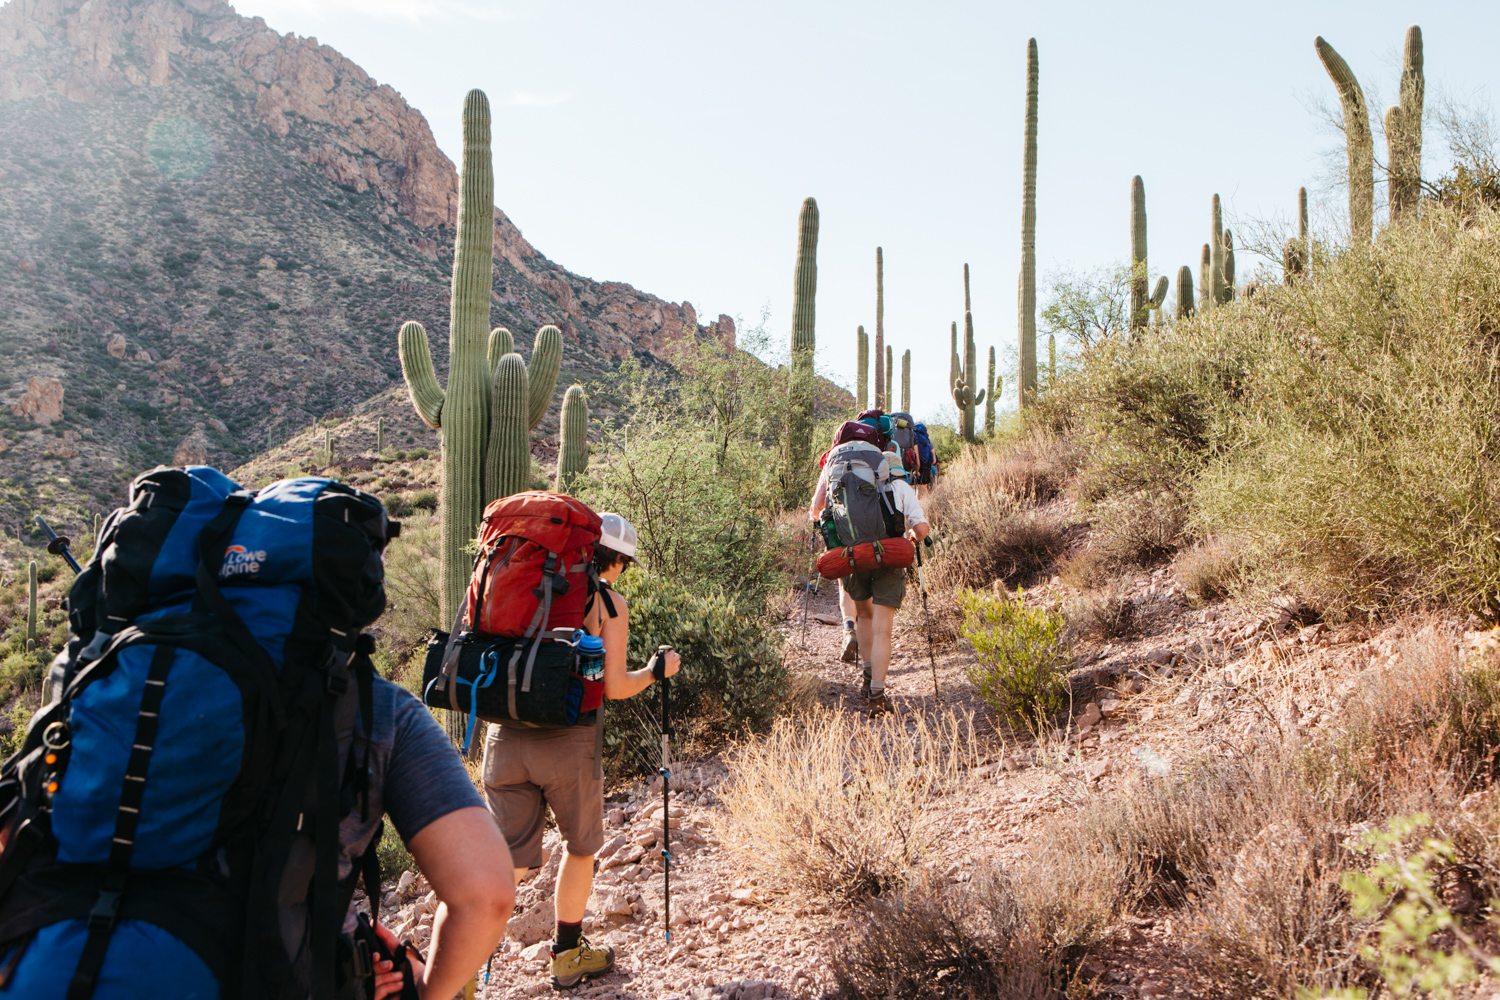 Episode : Purpose and Perspective in the Superstition Mountains